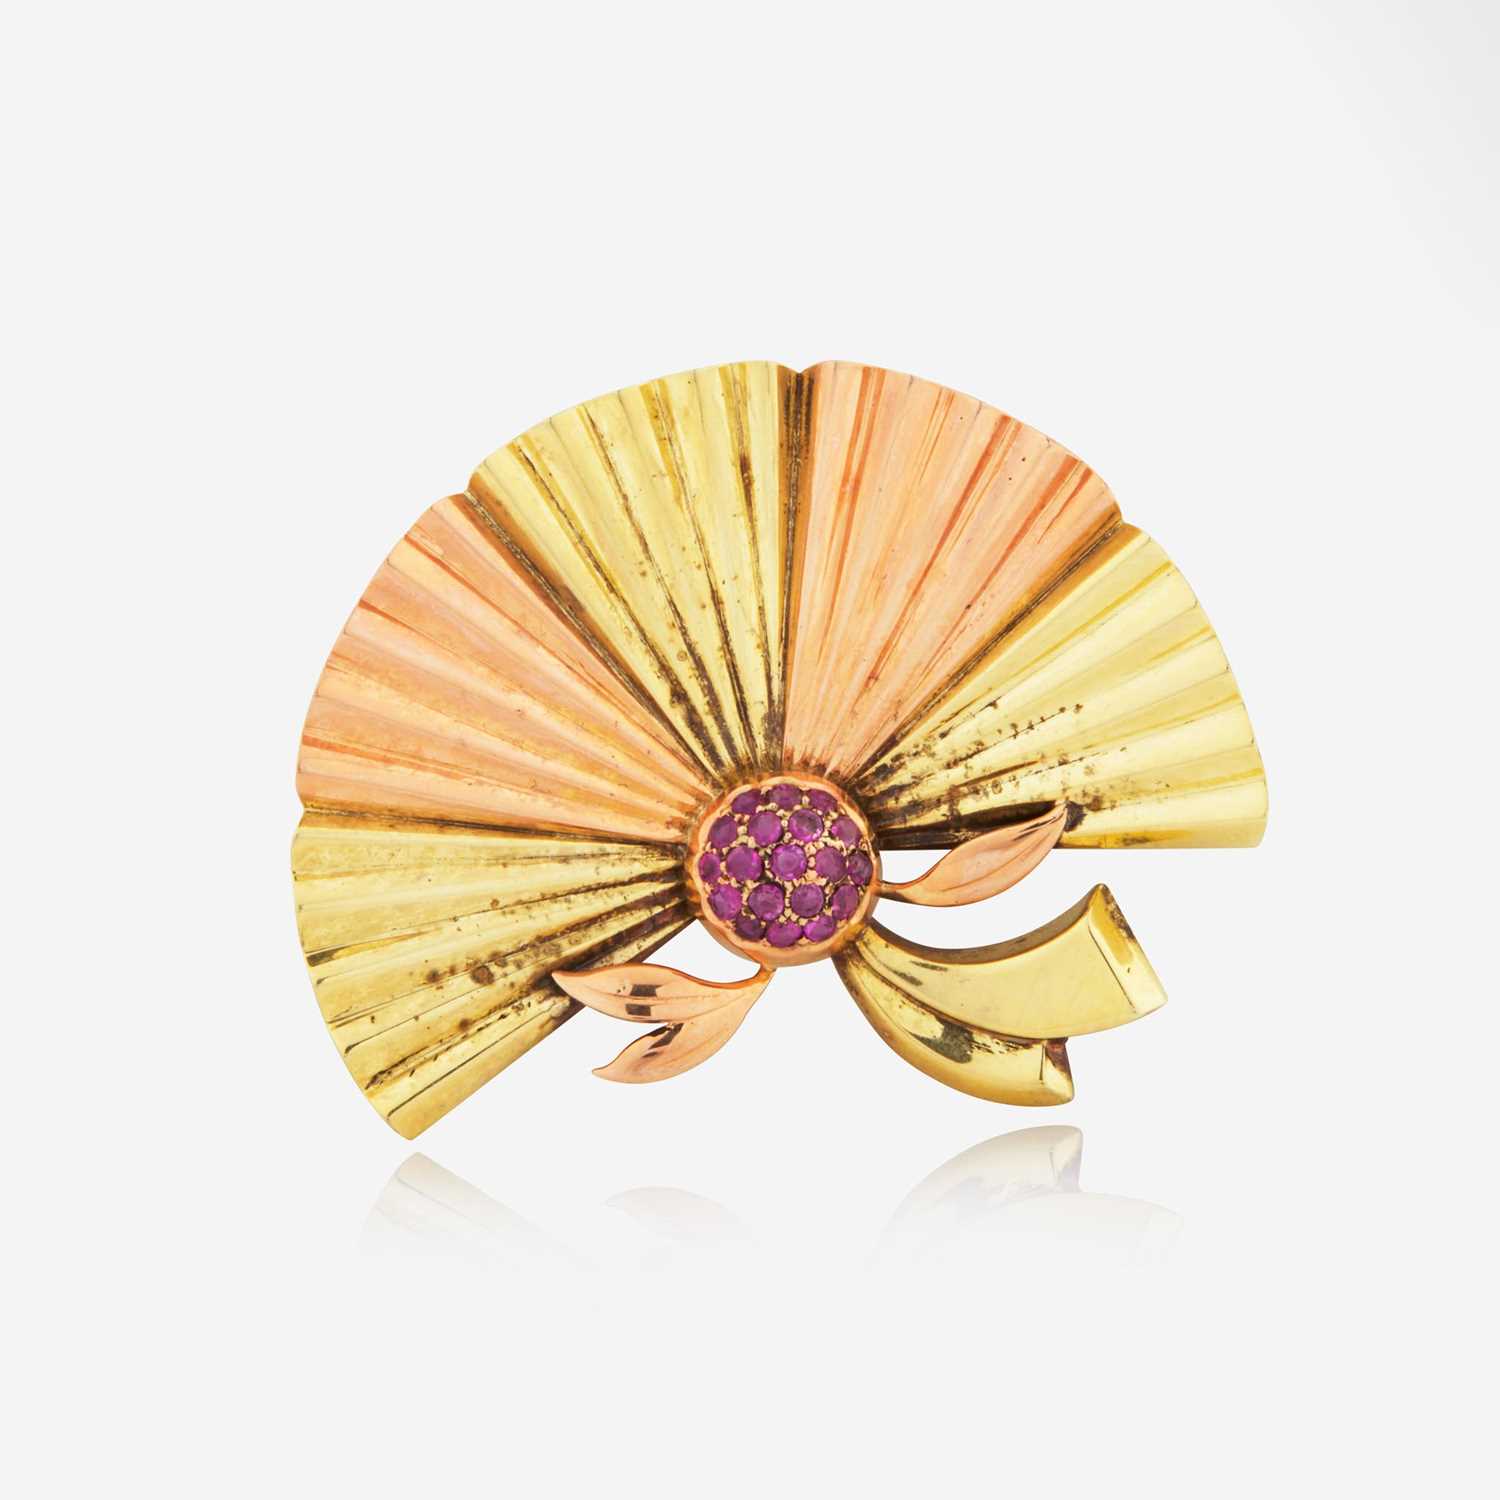 Lot 41 - A Retro 14K Gold and Ruby Brooch